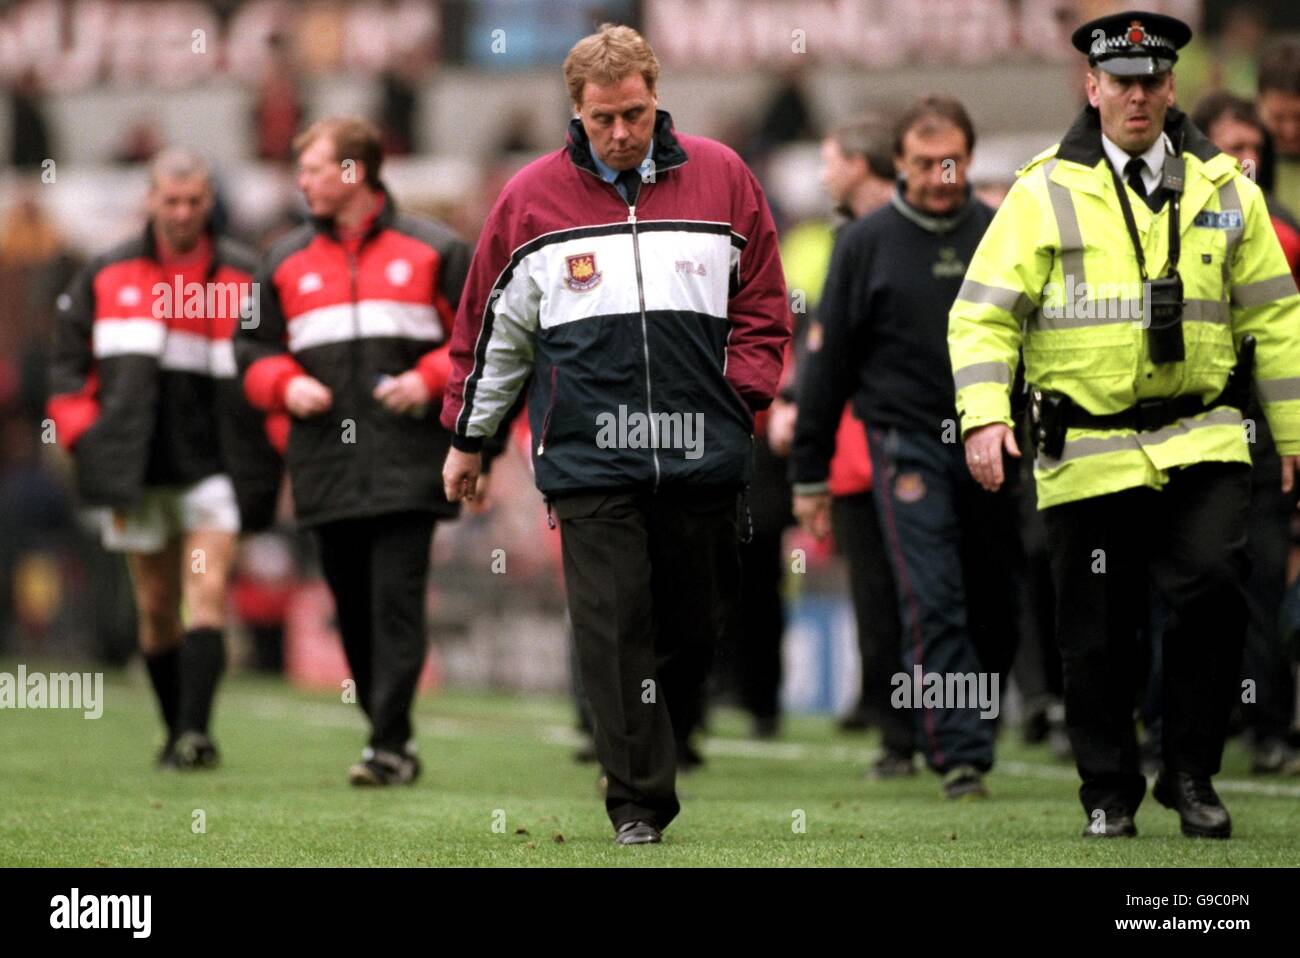 Soccer - FA Carling Premiership - Manchester United v West Ham United. West Ham United manager Harry Redknapp trudges off after seeing his side lose 7-1 Stock Photo